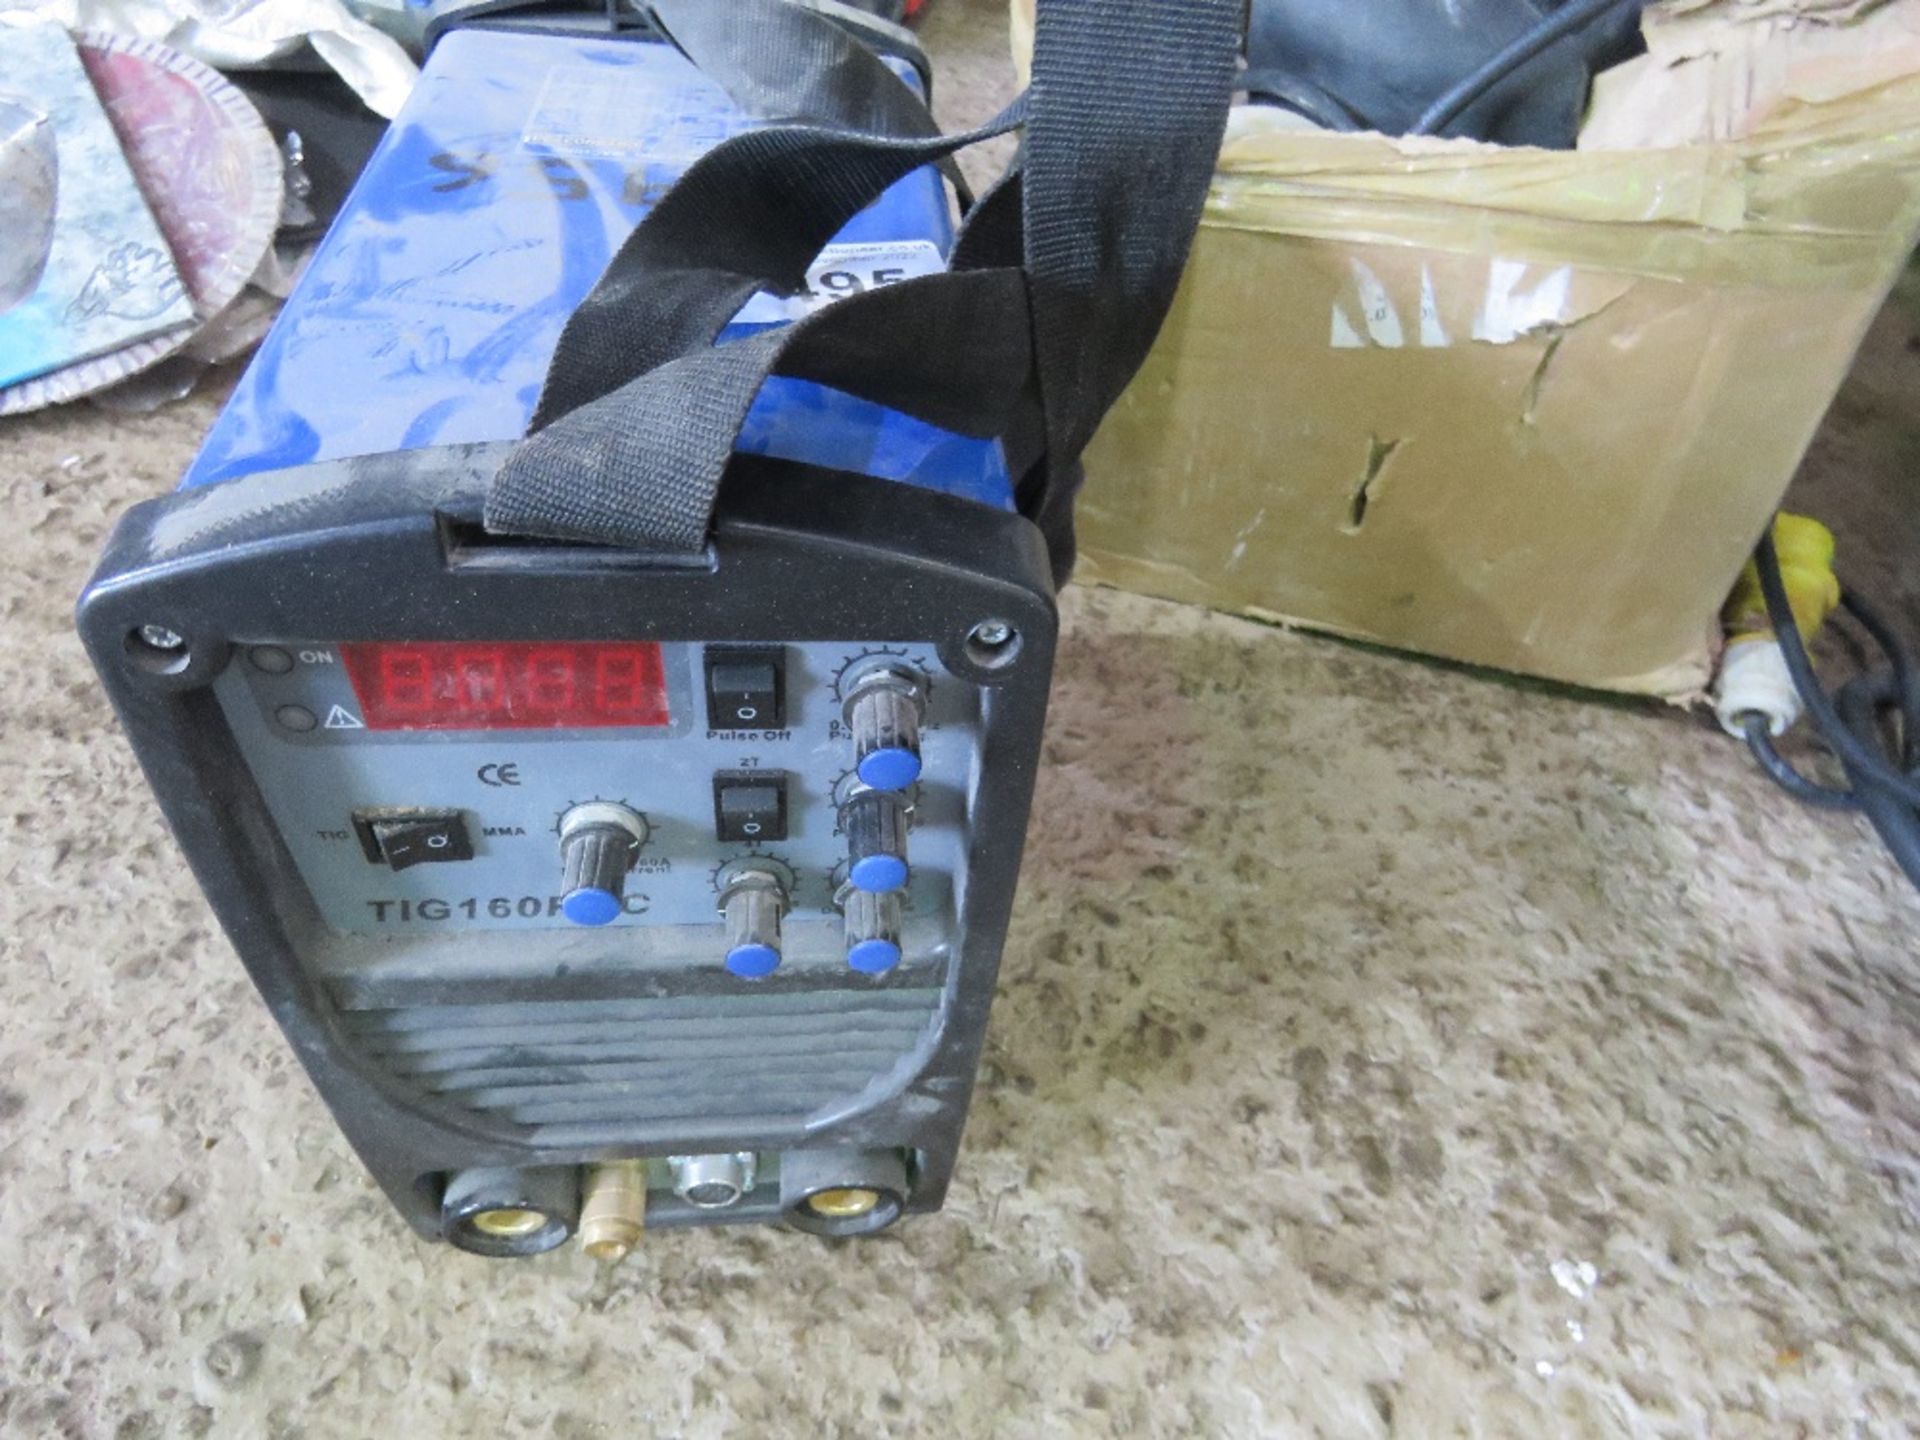 DC TIG WELDING UNIT WITH ATTACHMENTS, BOXED, LITTLE SIGN OF USEAGE. SOURCED FROM COMPANY LIQUIDAT - Image 5 of 5